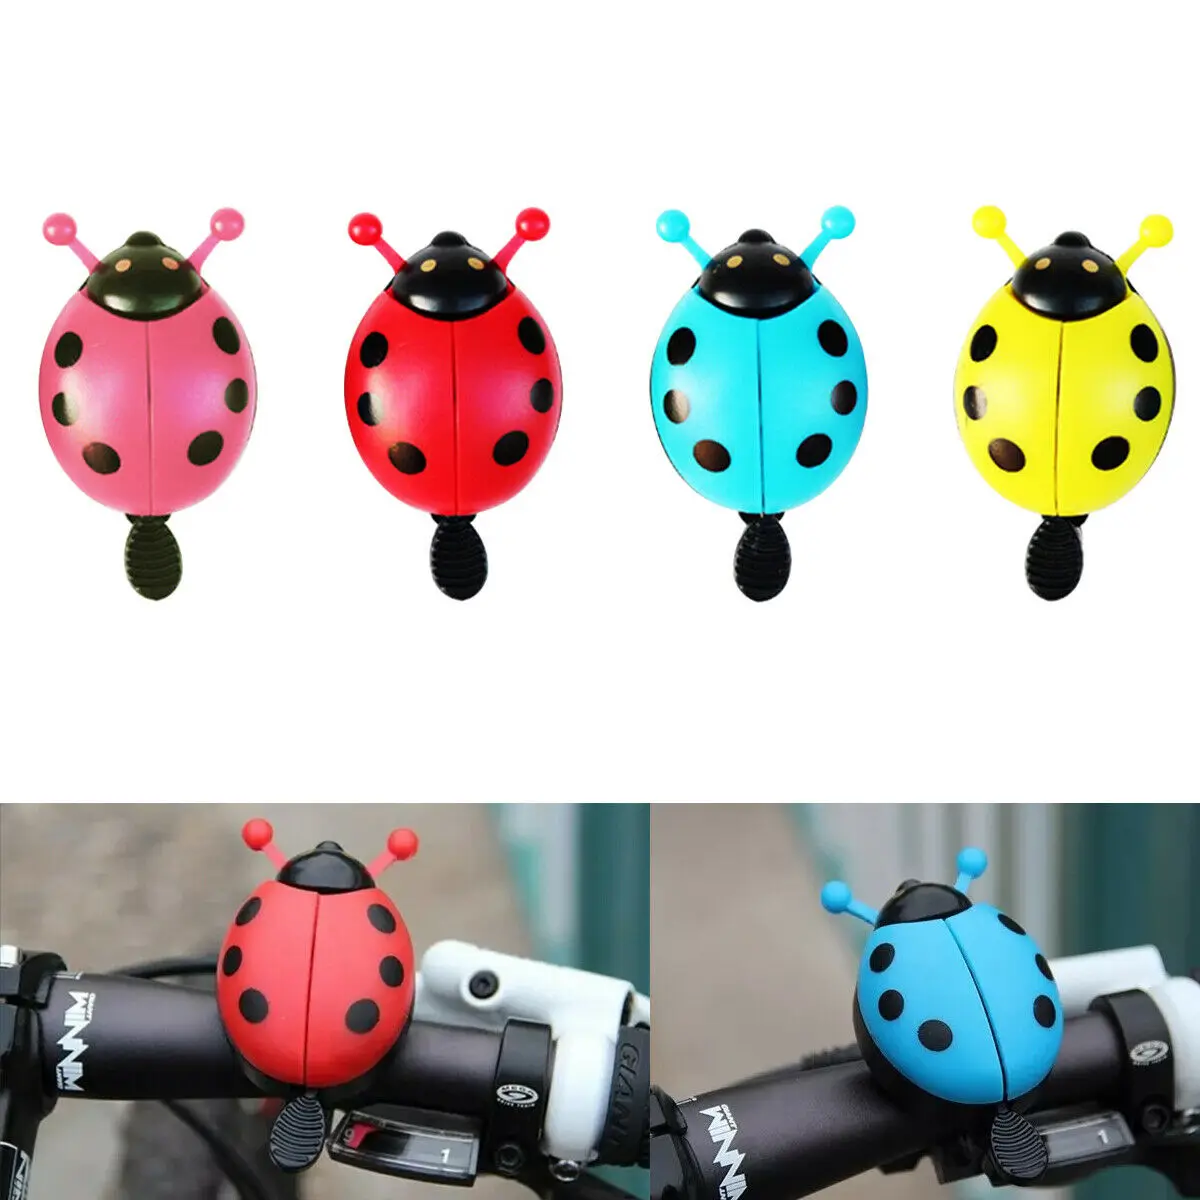 

Bicycle Bell Ring Beetle Cartoon Cycling Bell Lovely Kids Ladybug Bell Ring for Bike Ride Horn Alarm bicycle Accessories